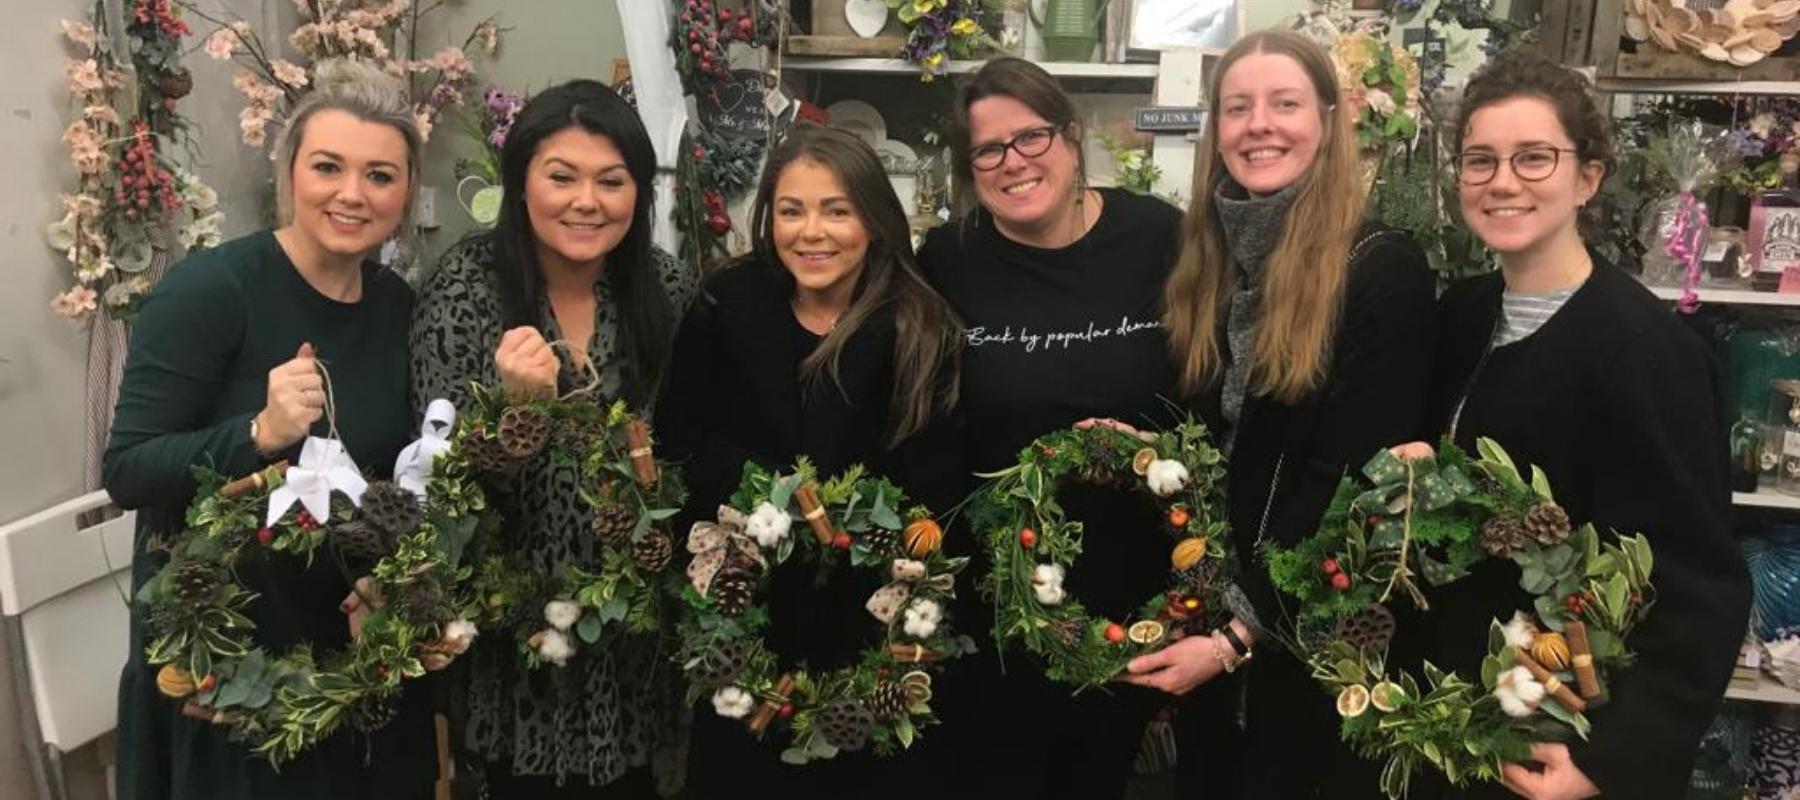 Festive Fun Wreath Making with Booker Flowers and Gifts